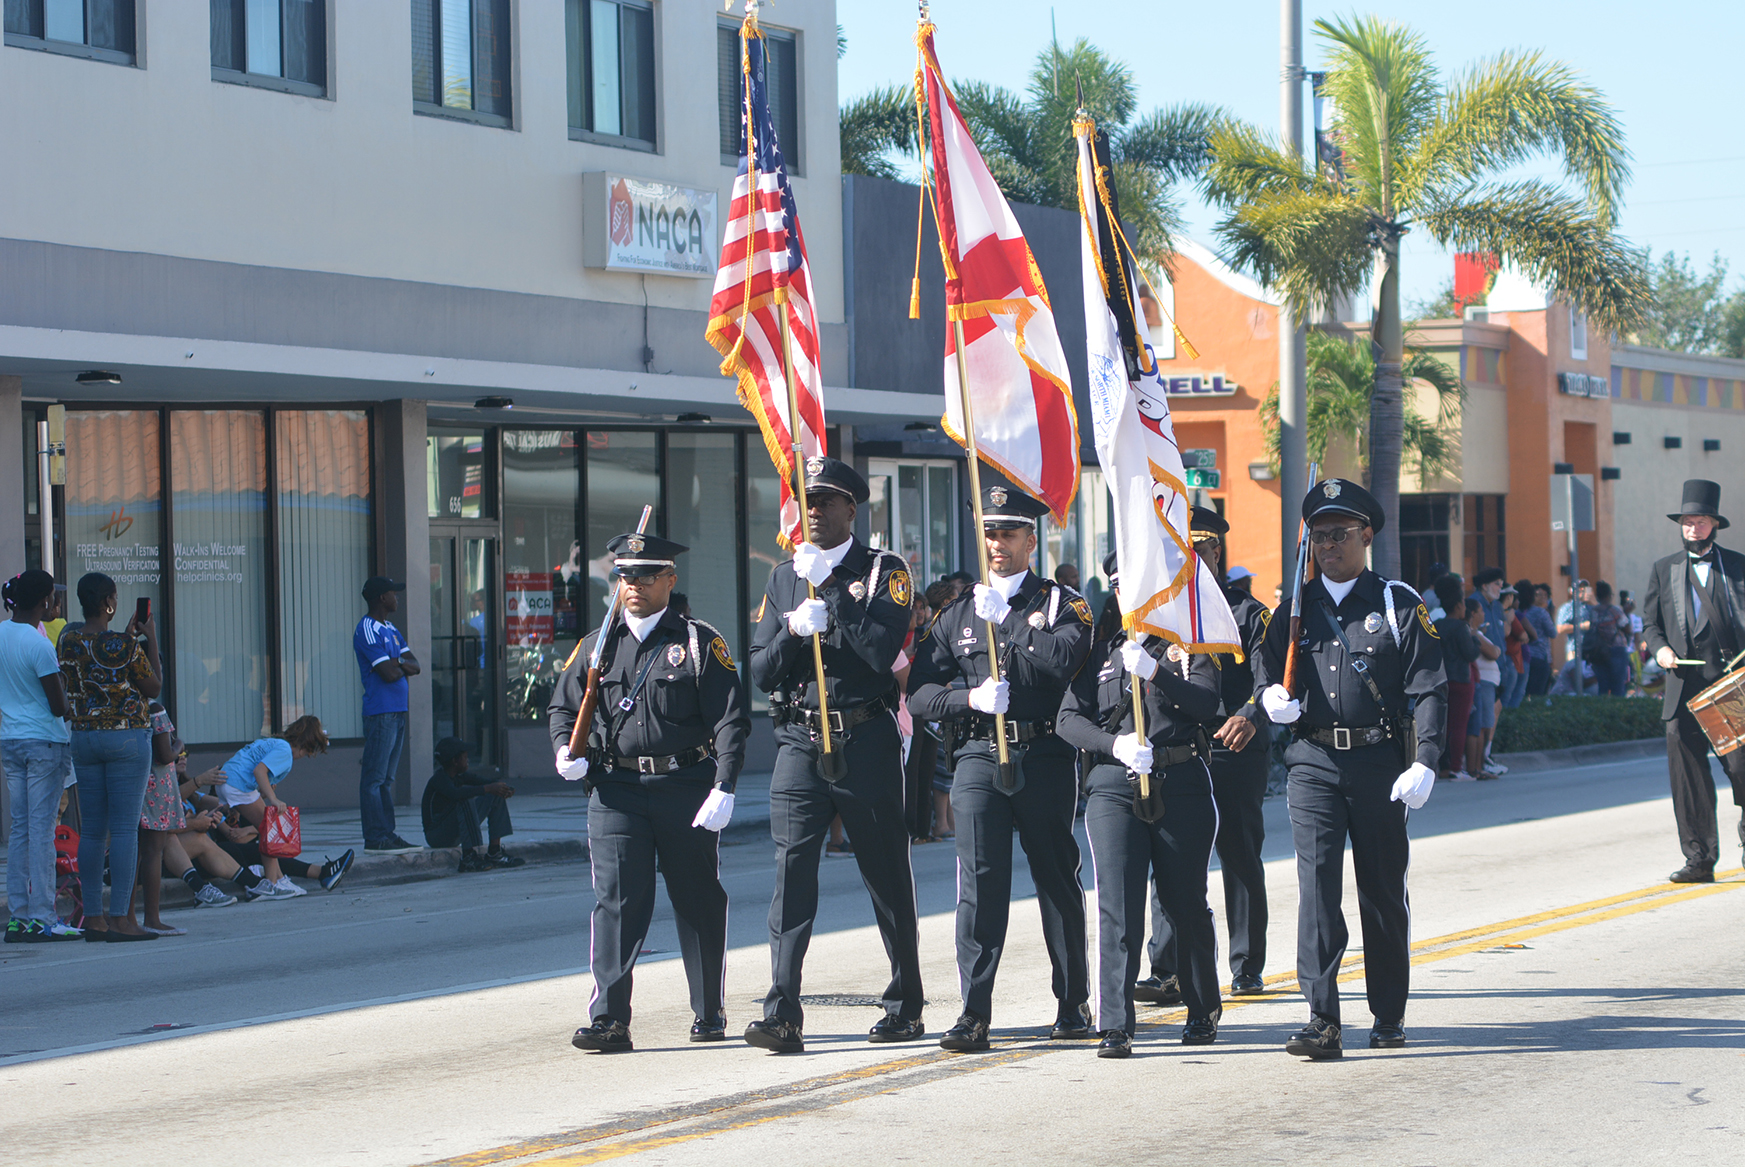 45th Annual North Miami Winter National Thanksgiving Parade Le